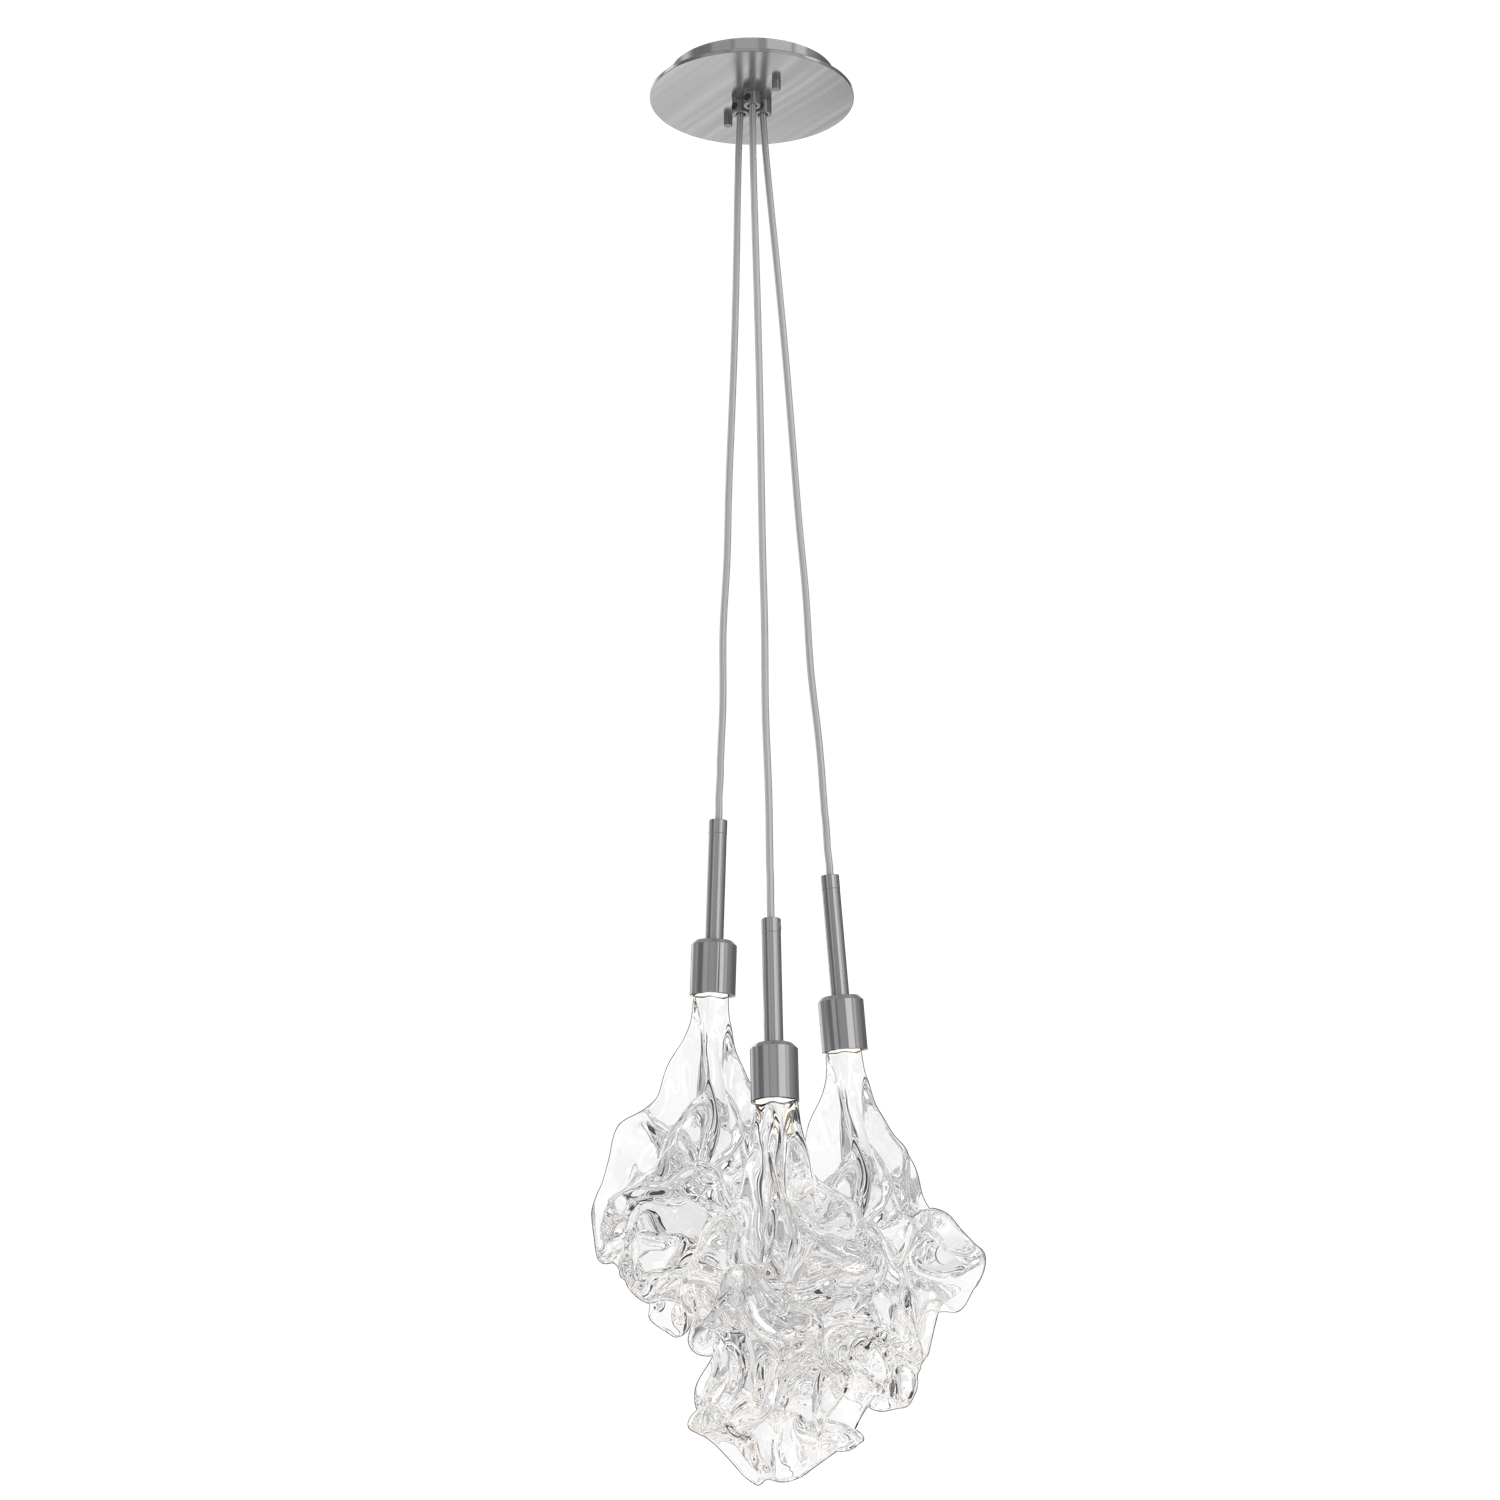 LAB0059-0A-GM-Hammerton-Studio-Blossom-3-light-cluster-pendant-light-with-gunmetal-finish-and-clear-handblown-crystal-glass-shades-and-LED-lamping